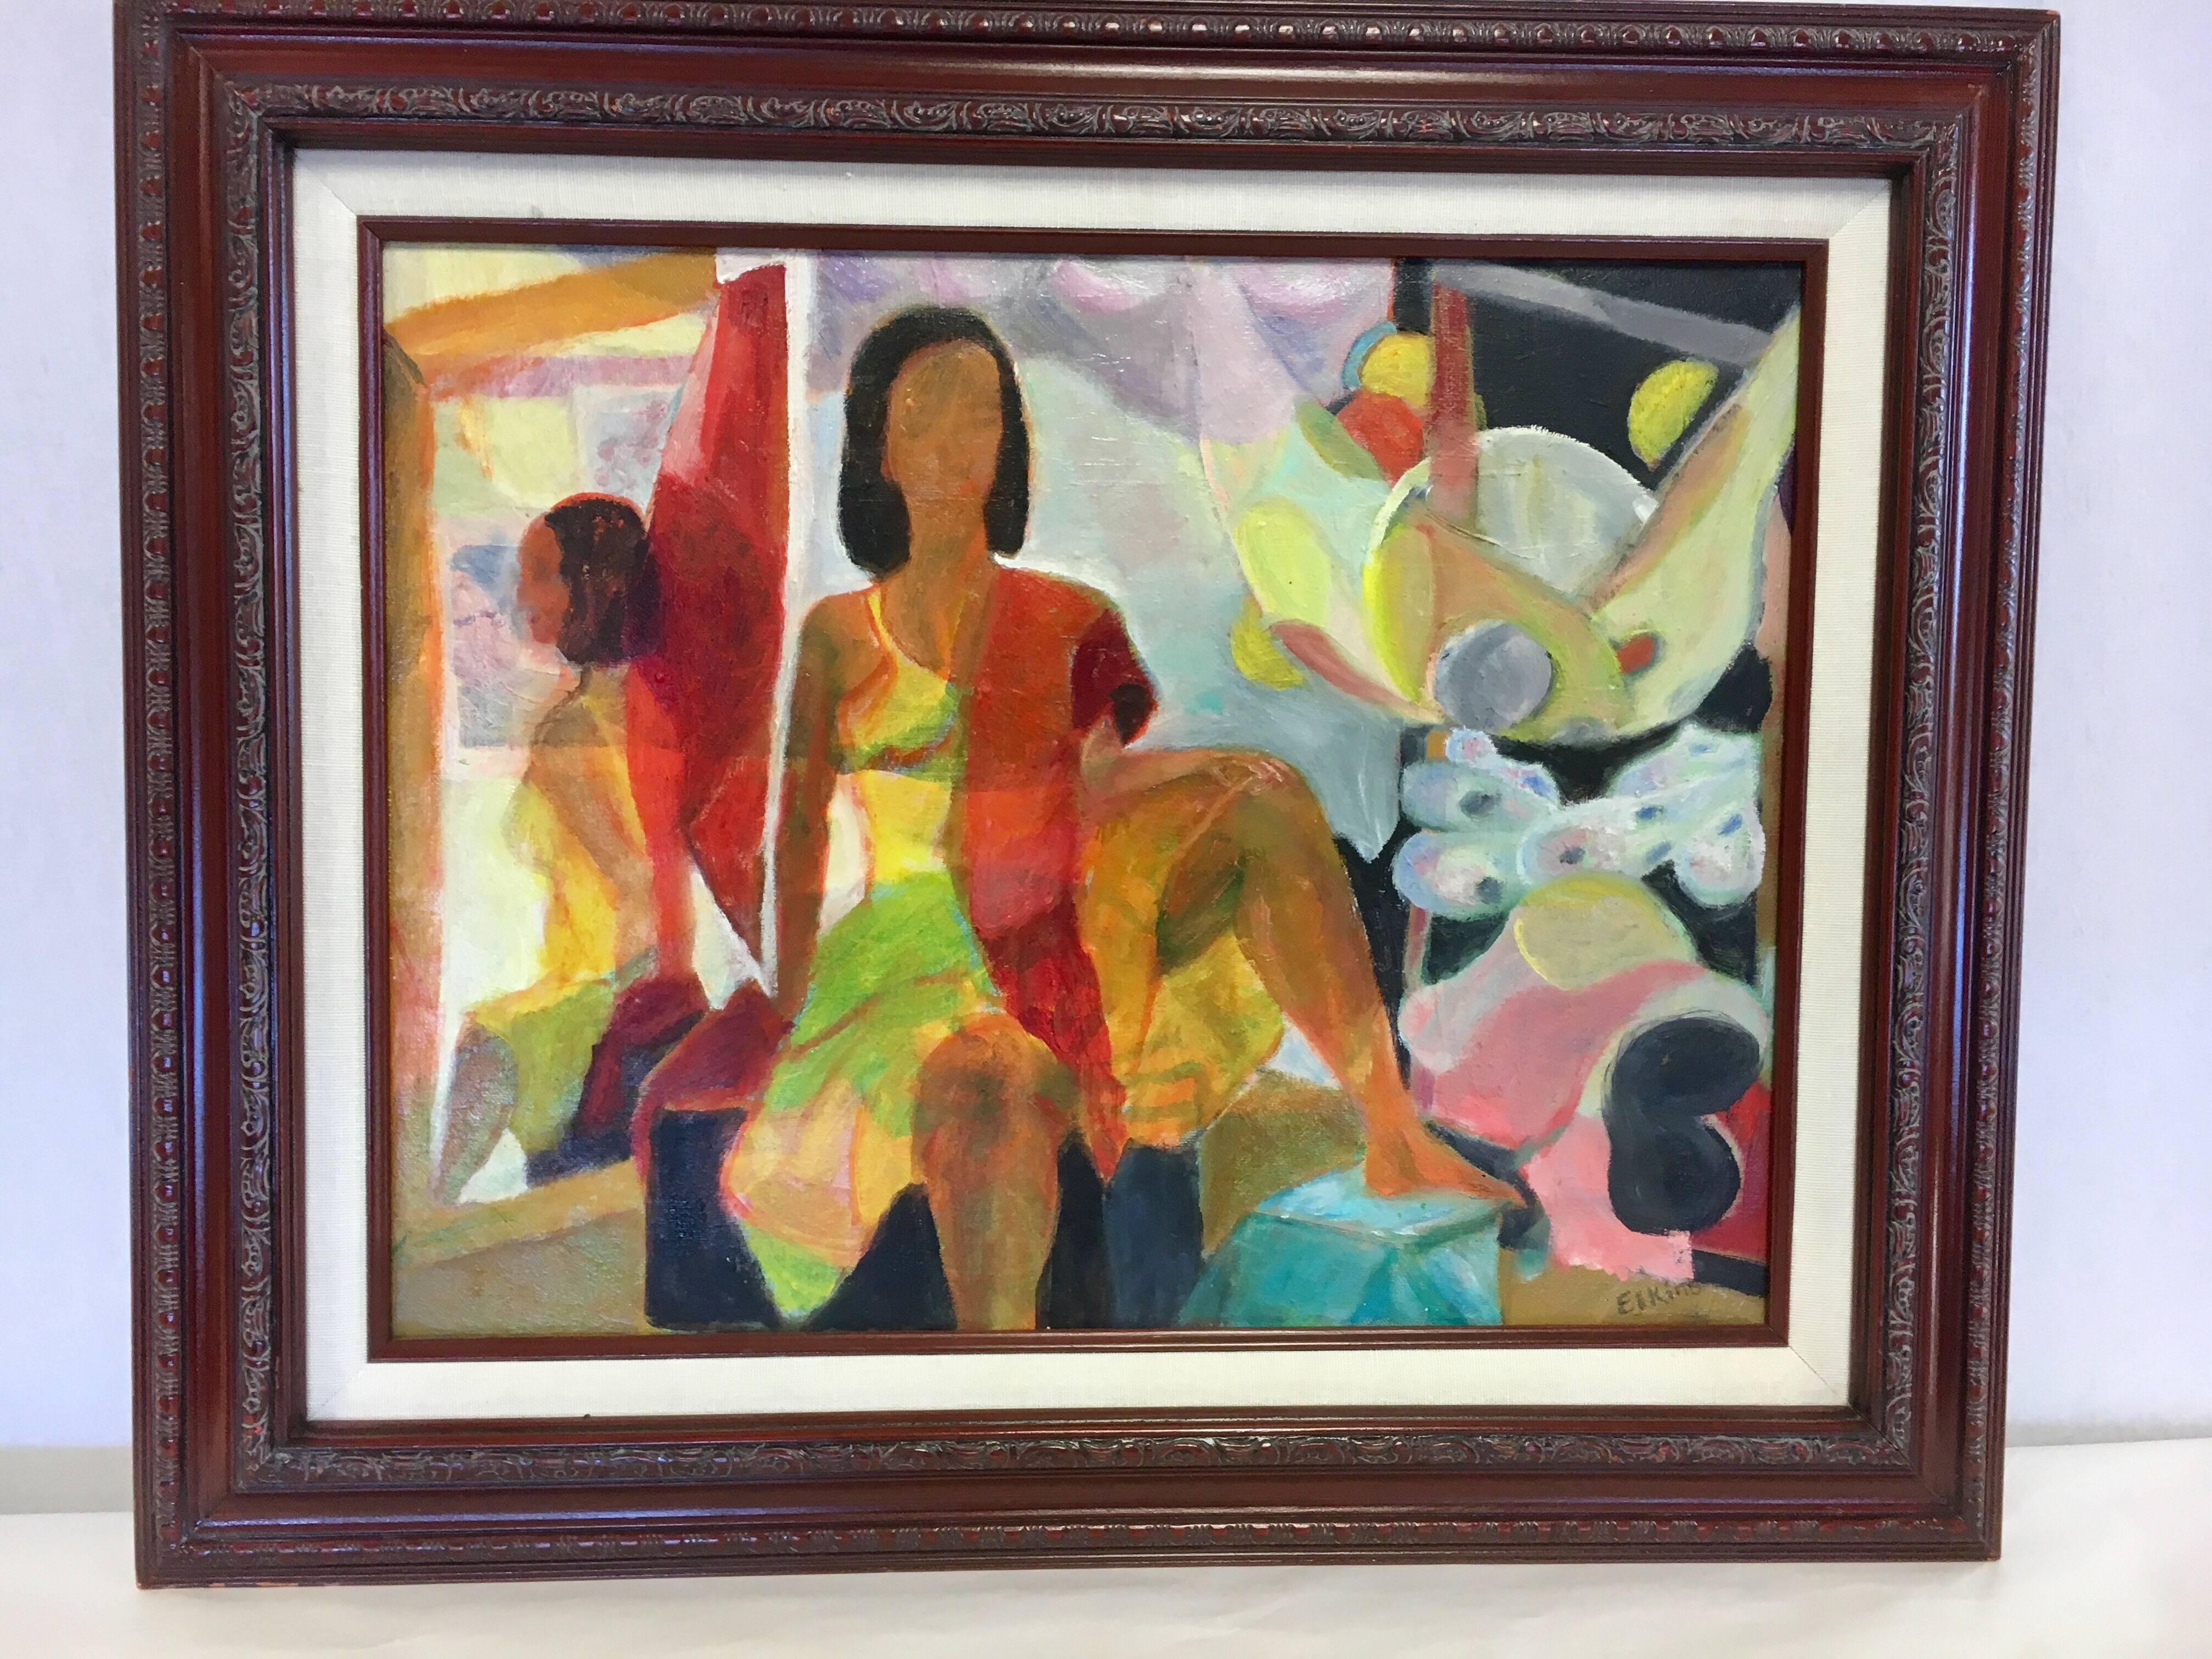 Signed, original 1970s oil on canvas, framed painting. Subject is a women in a yellow dress looking into a mirror. Signed on the bottom right by the artist Elkins.